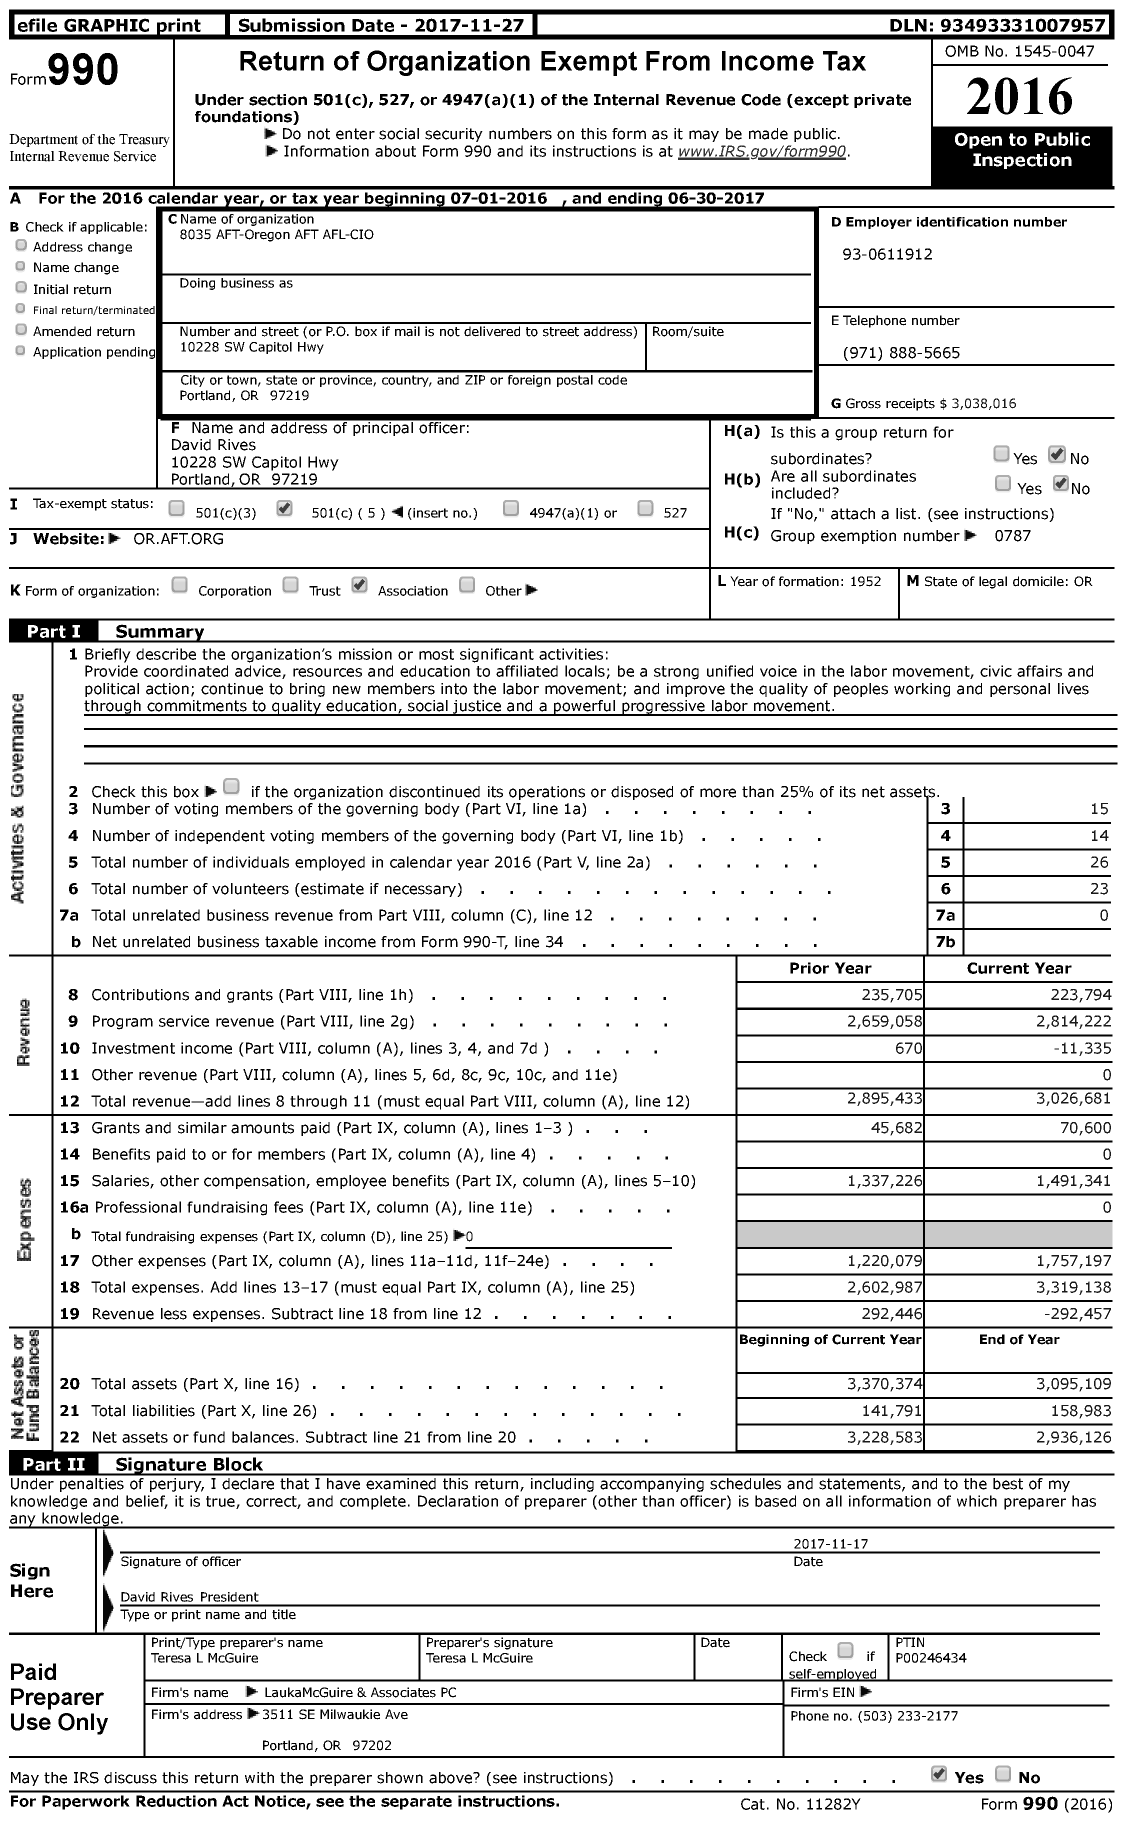 Image of first page of 2016 Form 990 for American Federation of Teachers - 8035 AFT-Oregon AFT AFL-CIO